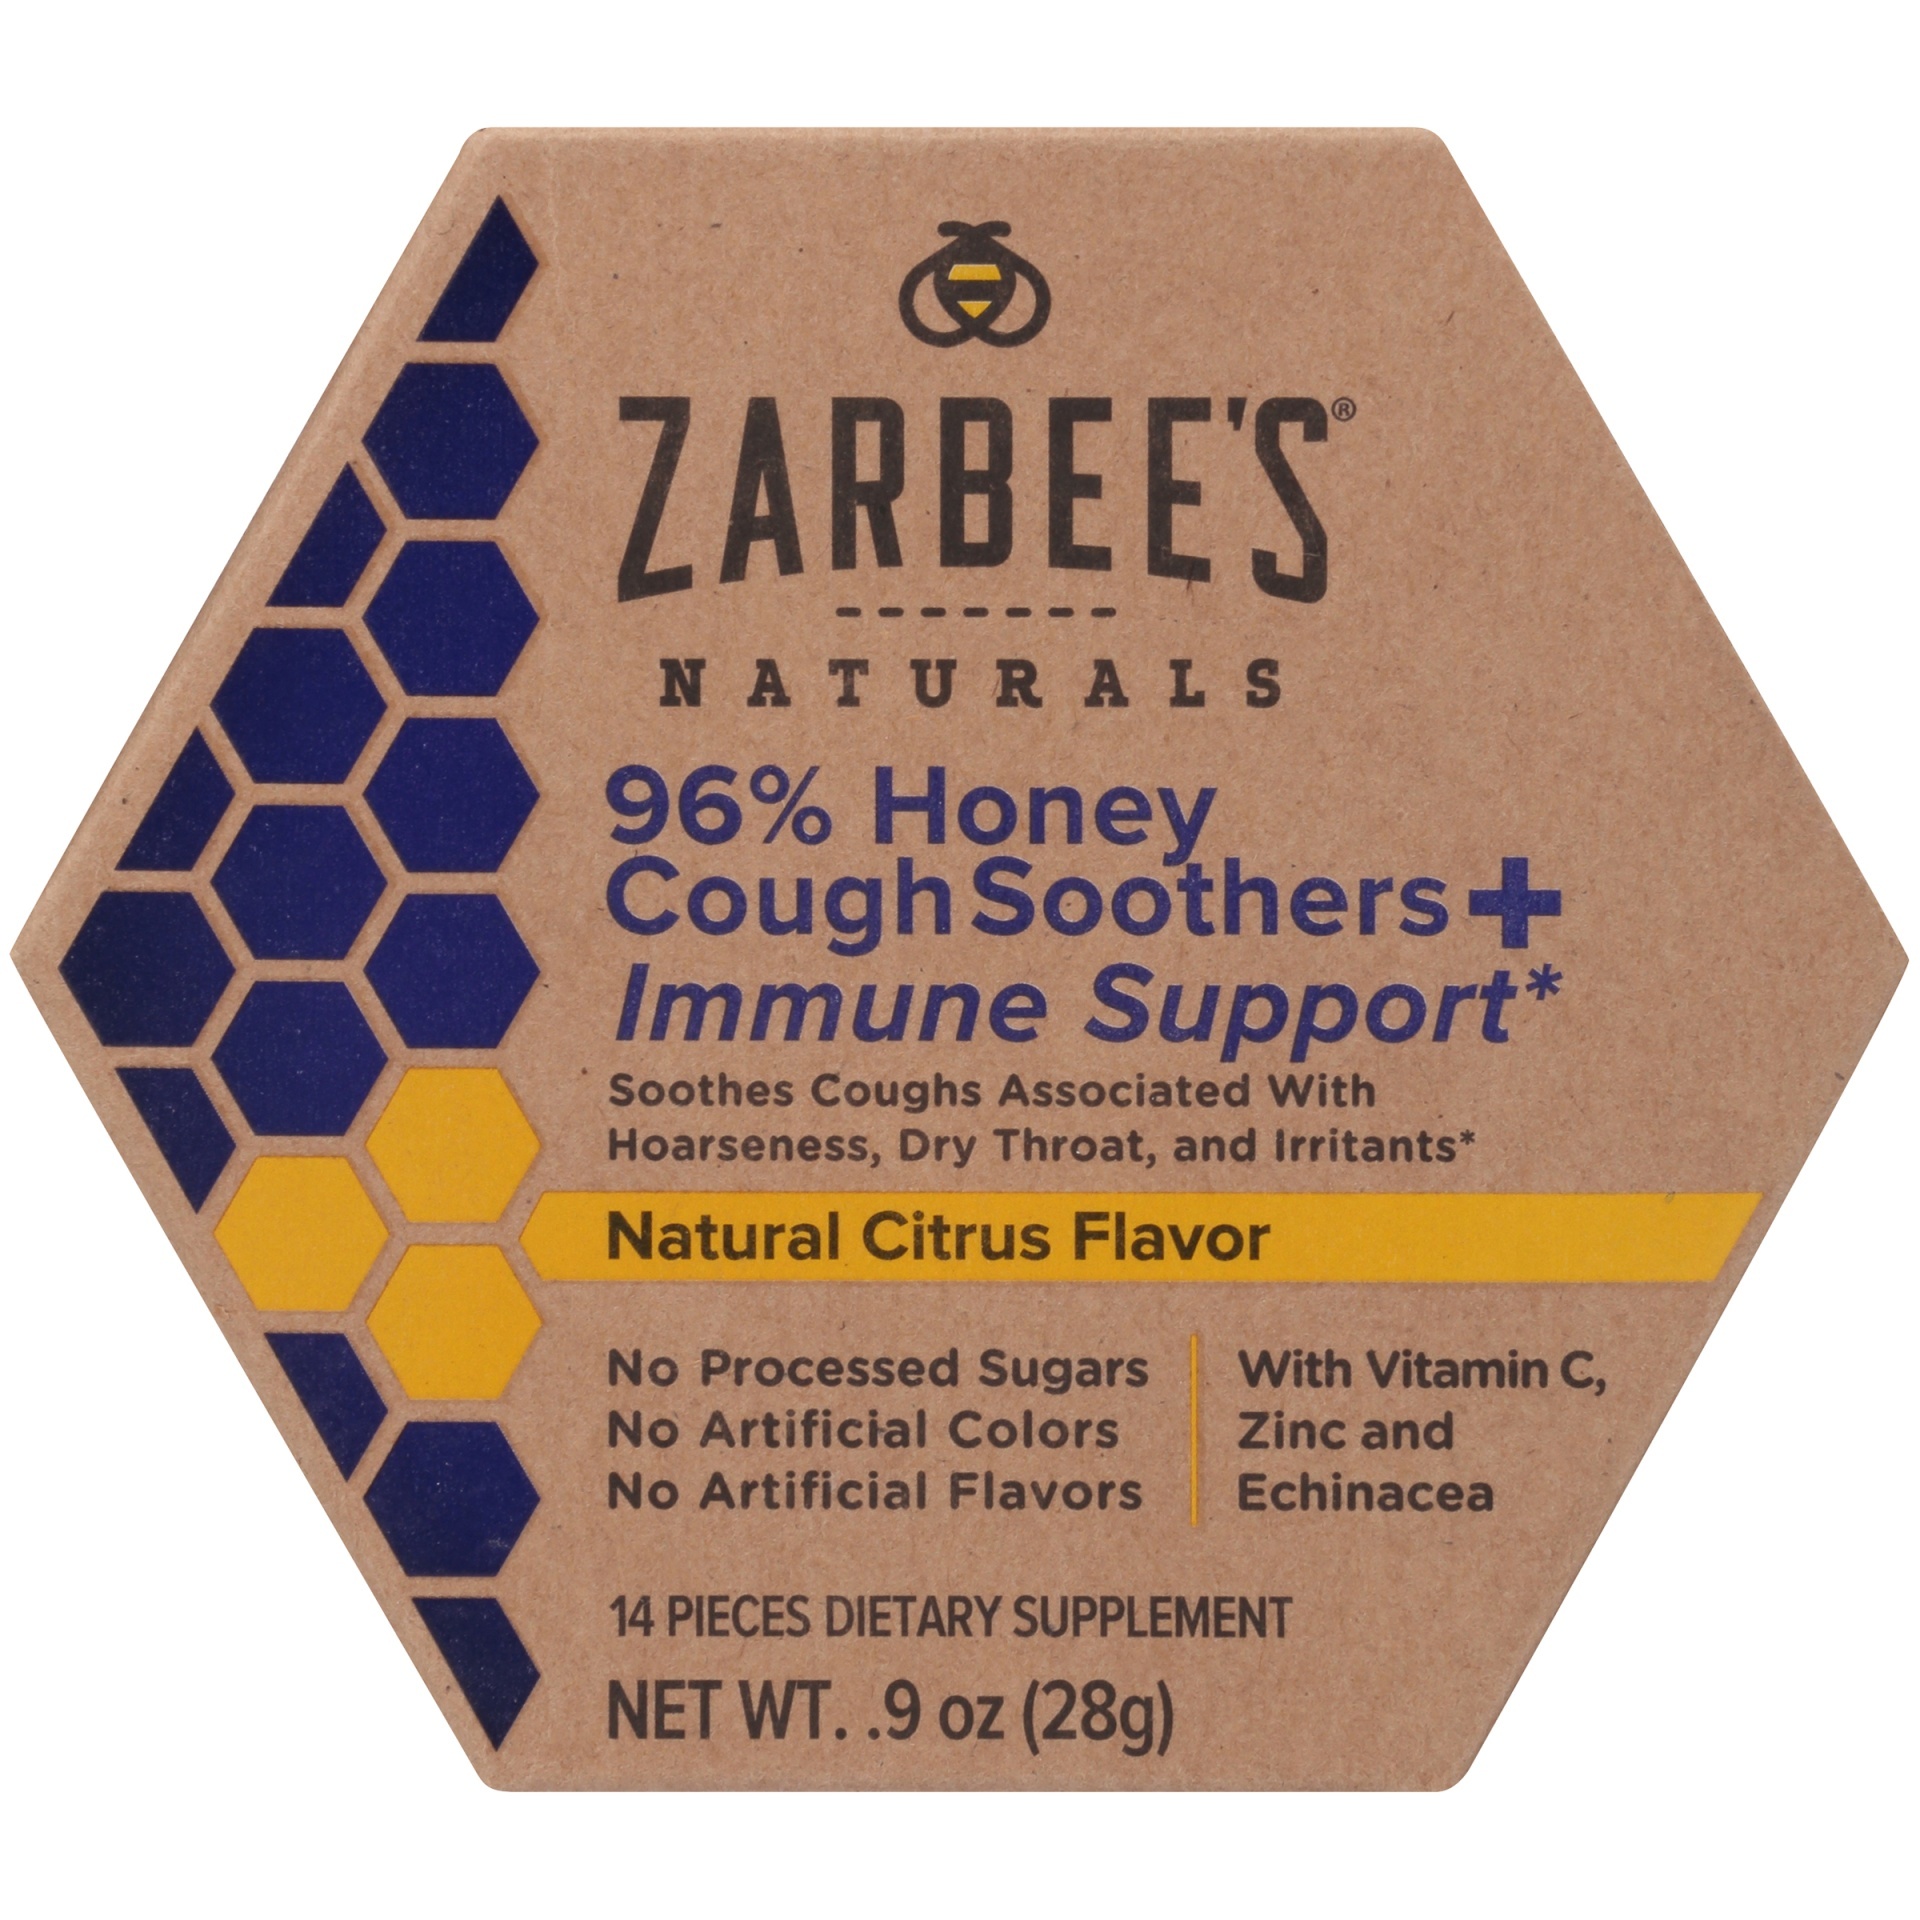 slide 1 of 6, Zarbee's Naturals 96% Honey Cough Soothers & Immune Support, Natural Citrus Flavor, 14 ct